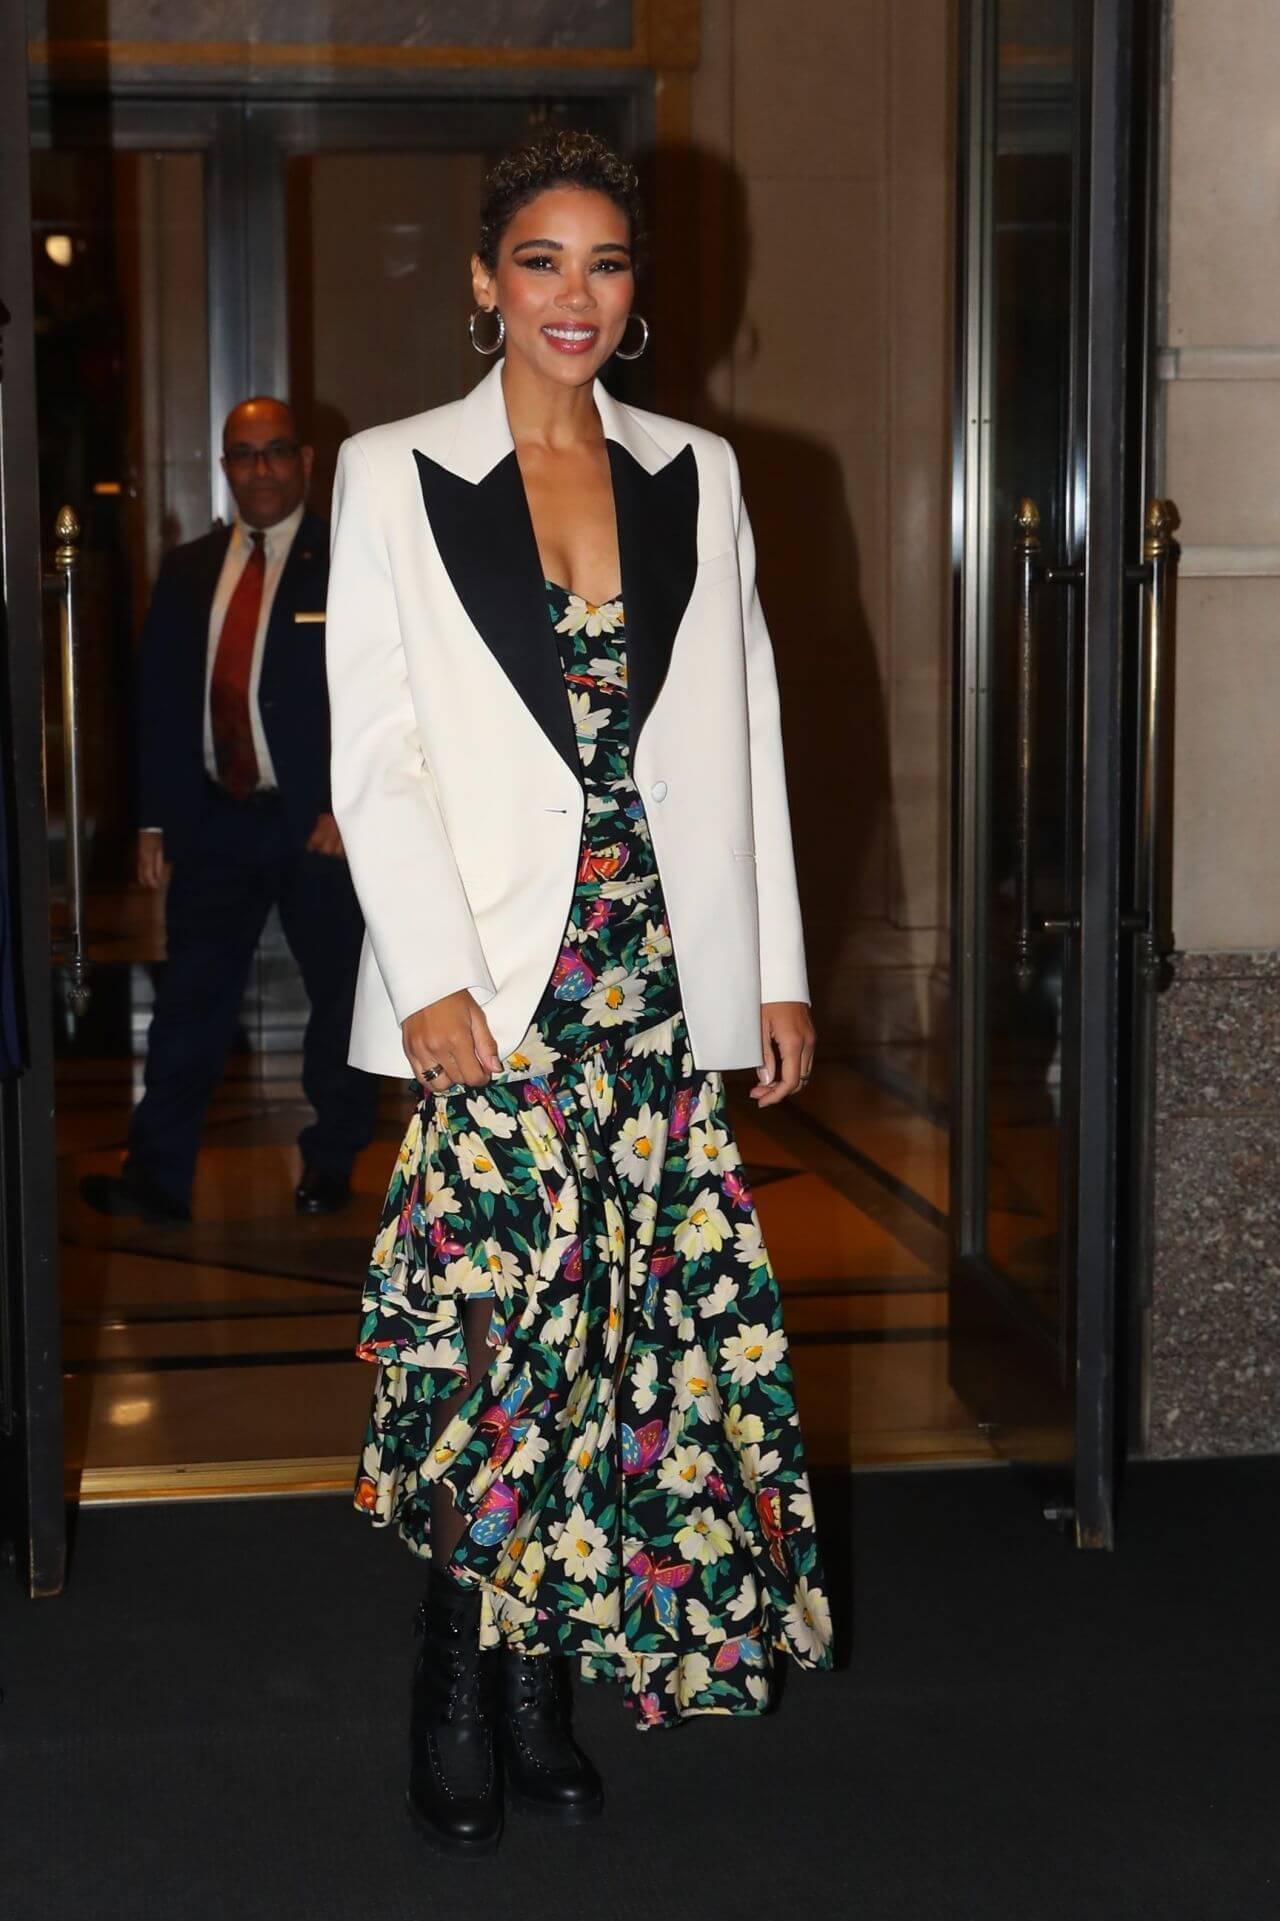 Alexandra Shipp in a Floral Print Dress and a White Blazer – “Tick, Tick… Boom!” Event in NY